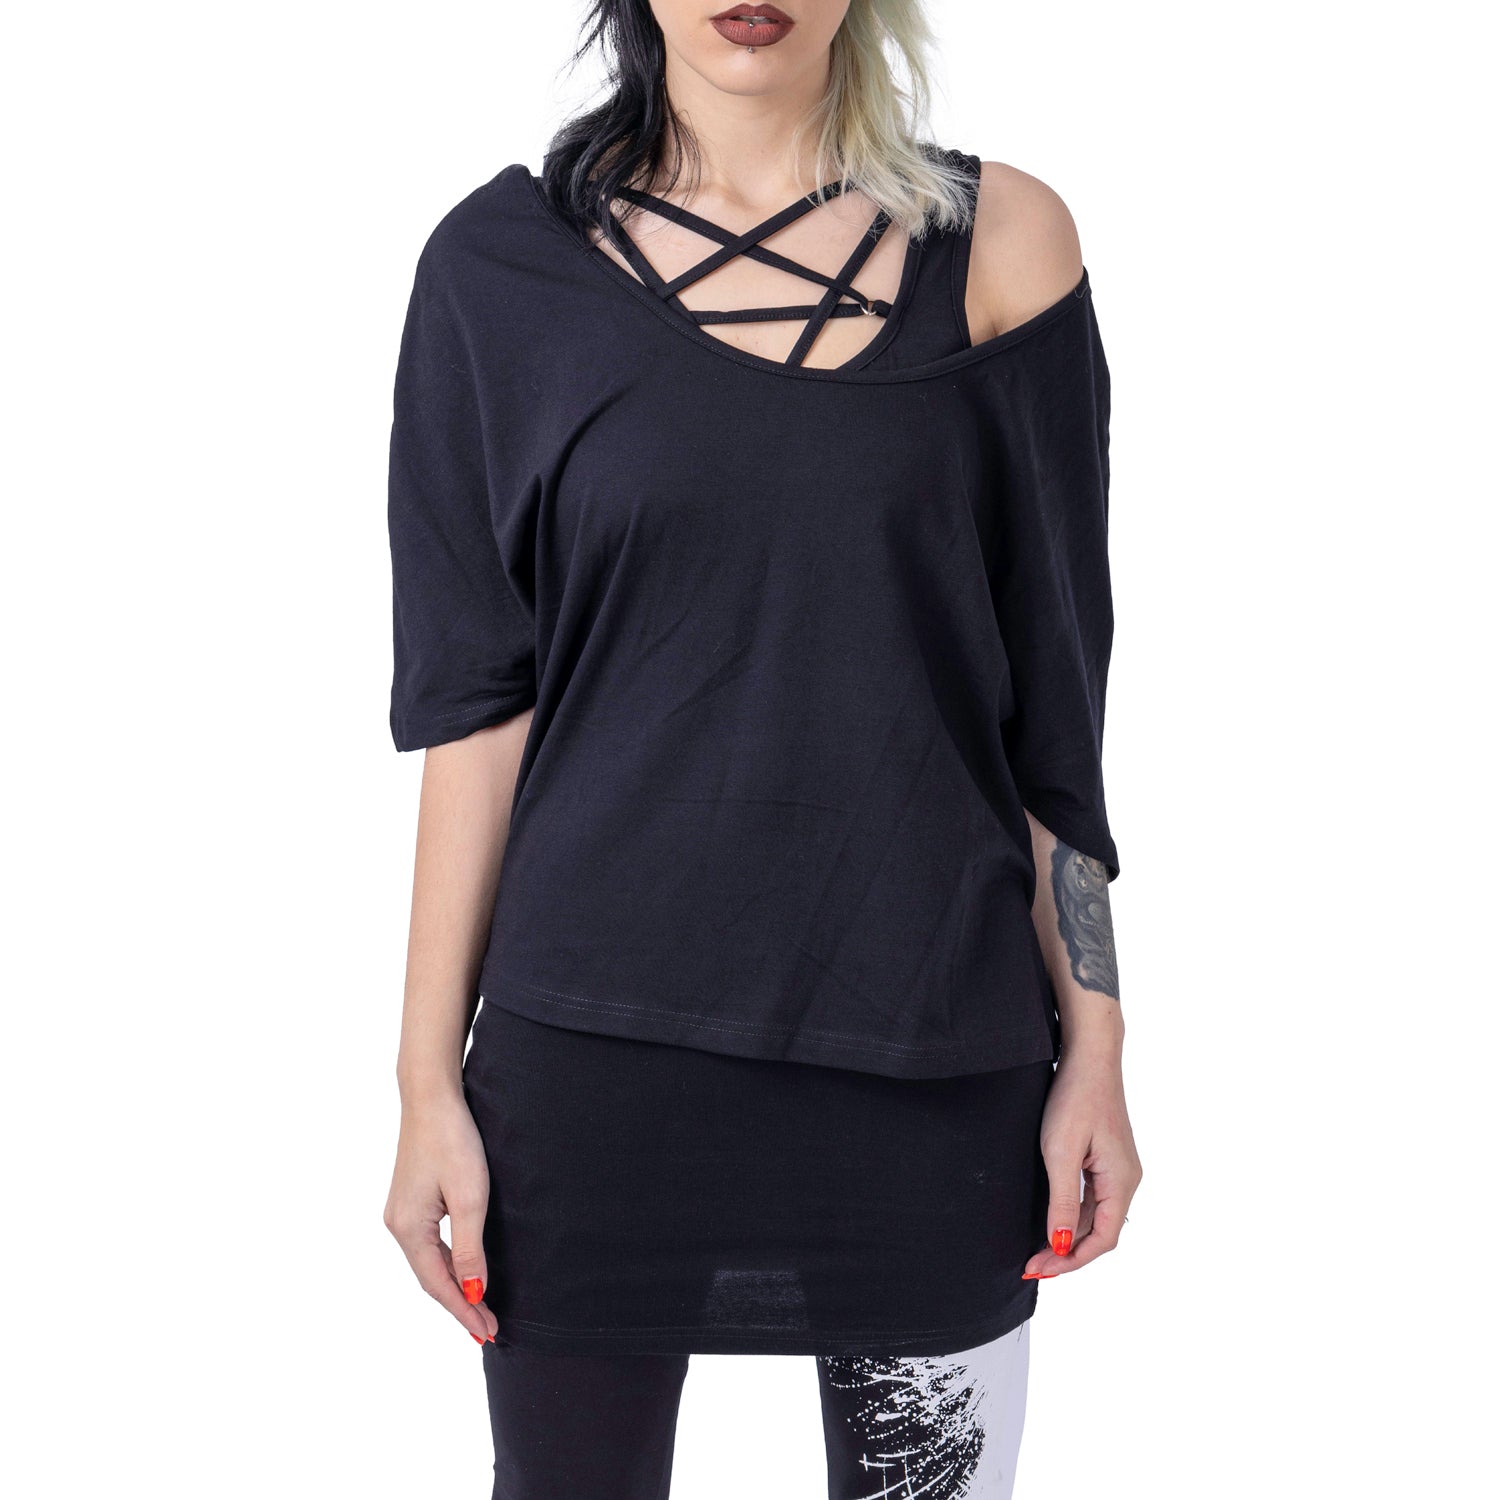 Innocent Laith Top - Kate's Clothing